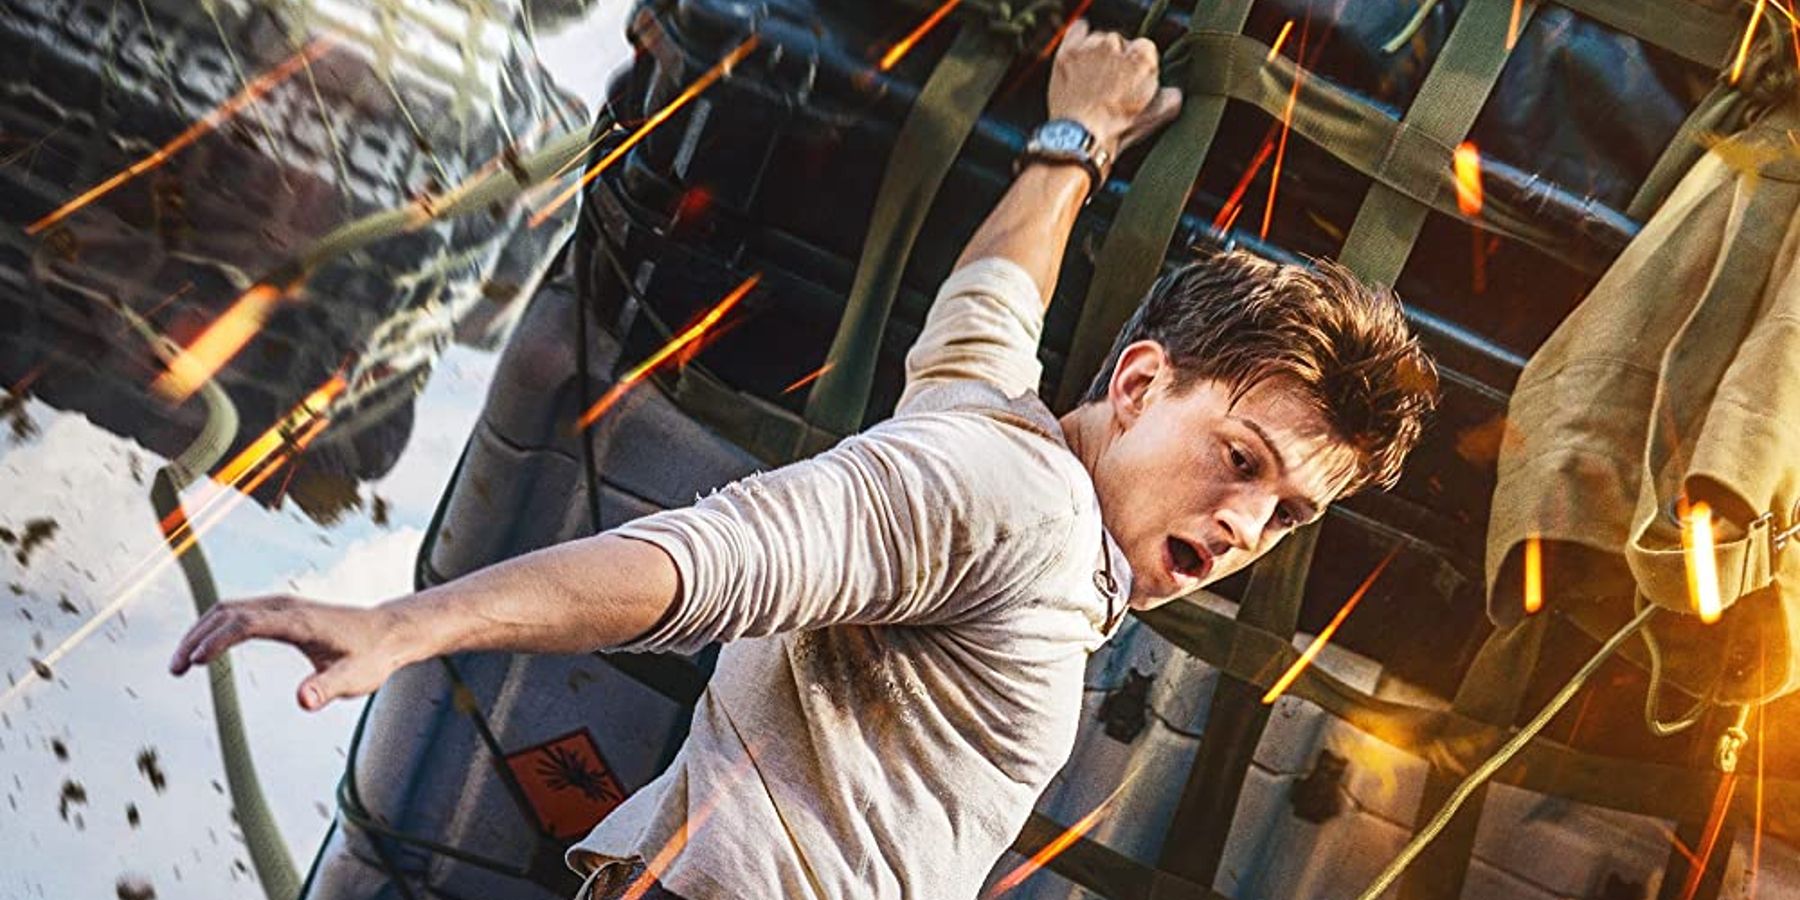 Nathan Drake hanging from cargo dangling from a plane in poster artwork for Uncharted